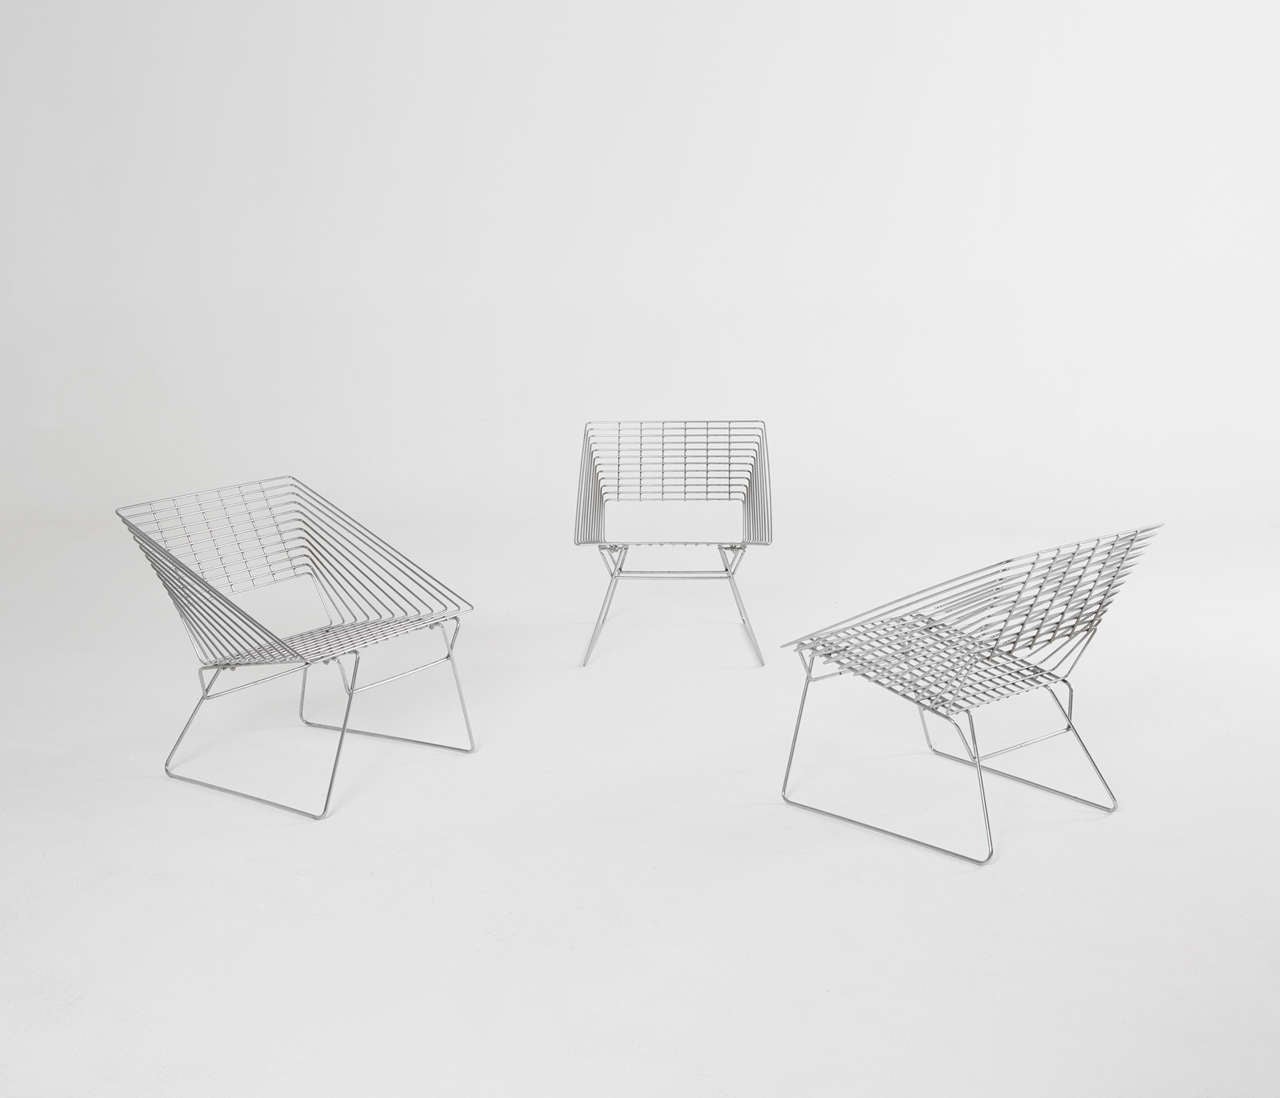 Set of three chrome wire easy chairs attributed to Verner Panton by Fritz Hansen 1970's.

A very nice square design lounge chair with a nice ratio between the seat and the base. The wires are spaced perfectly and the chrome is in a perfect